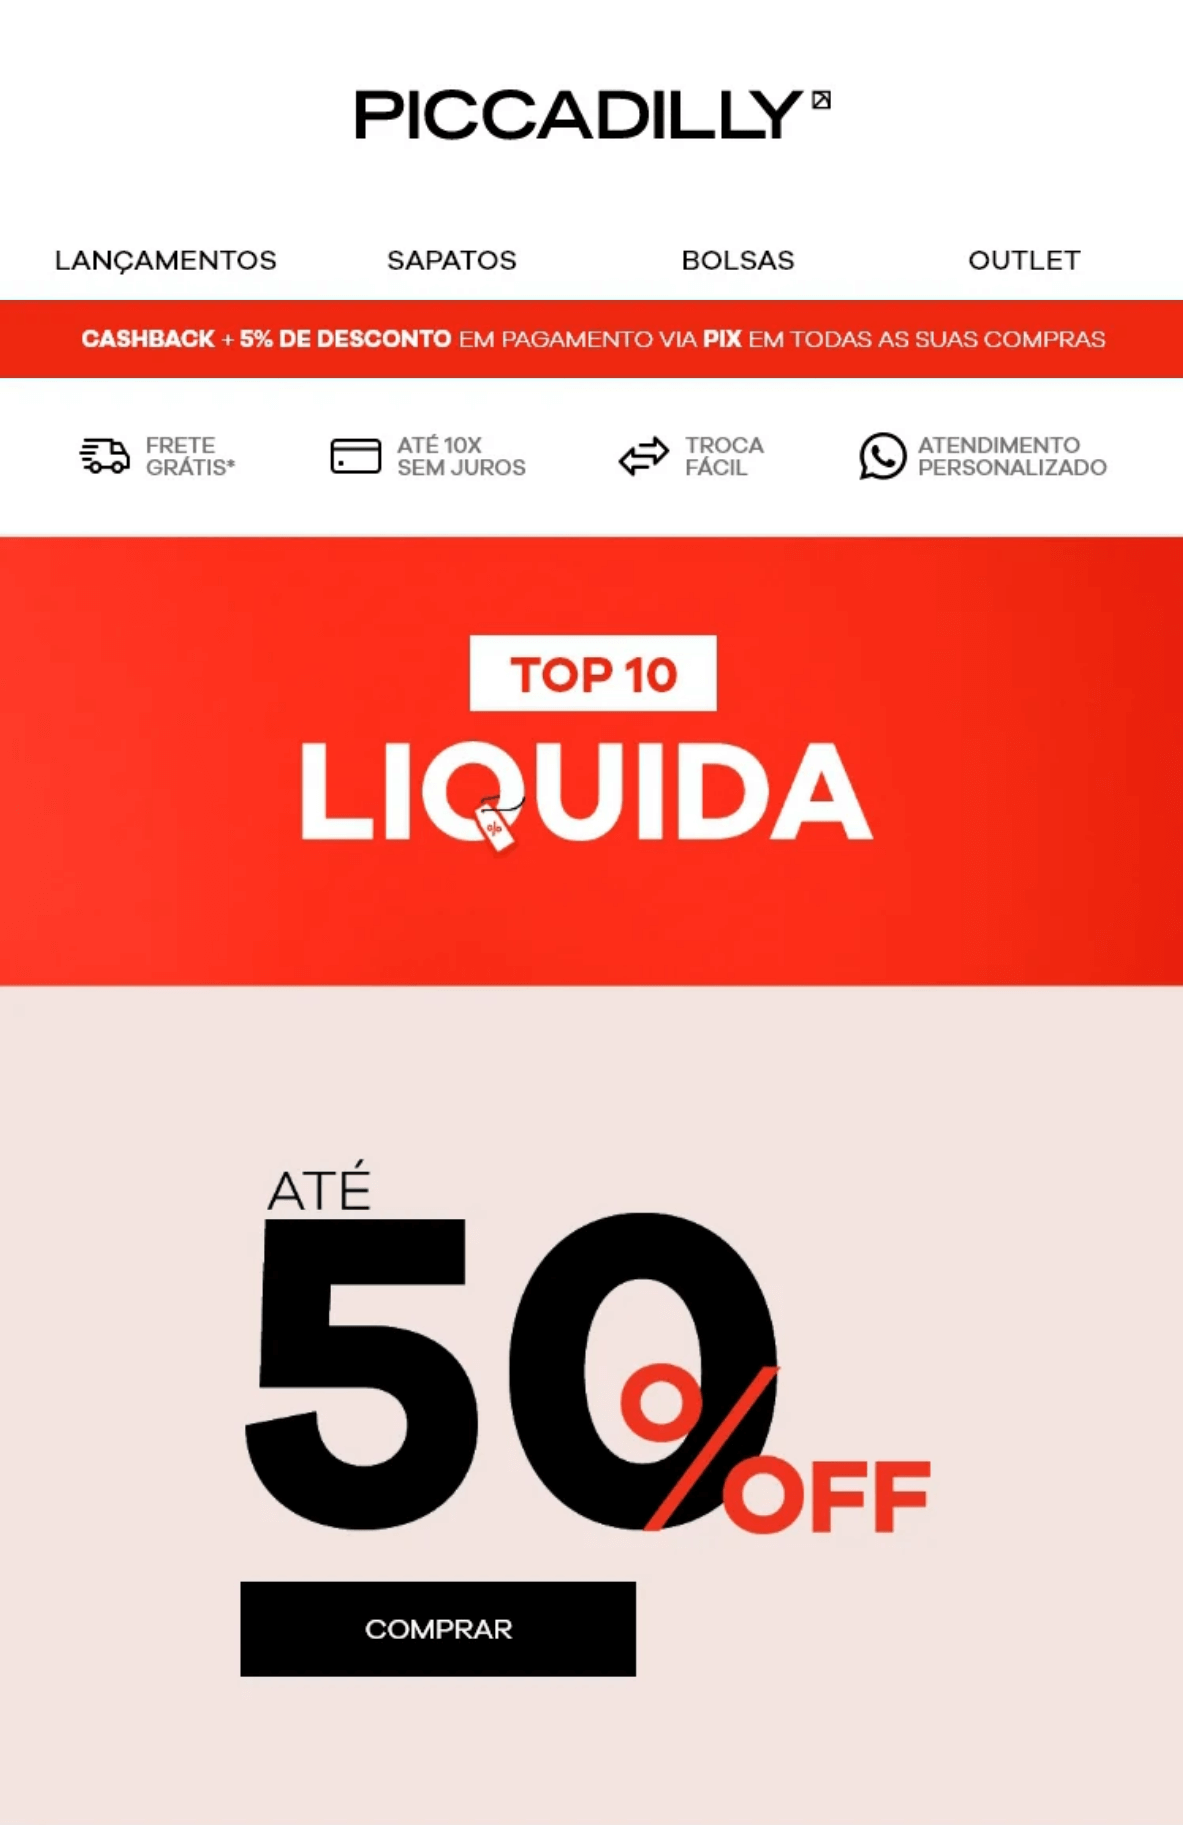 Email promocional